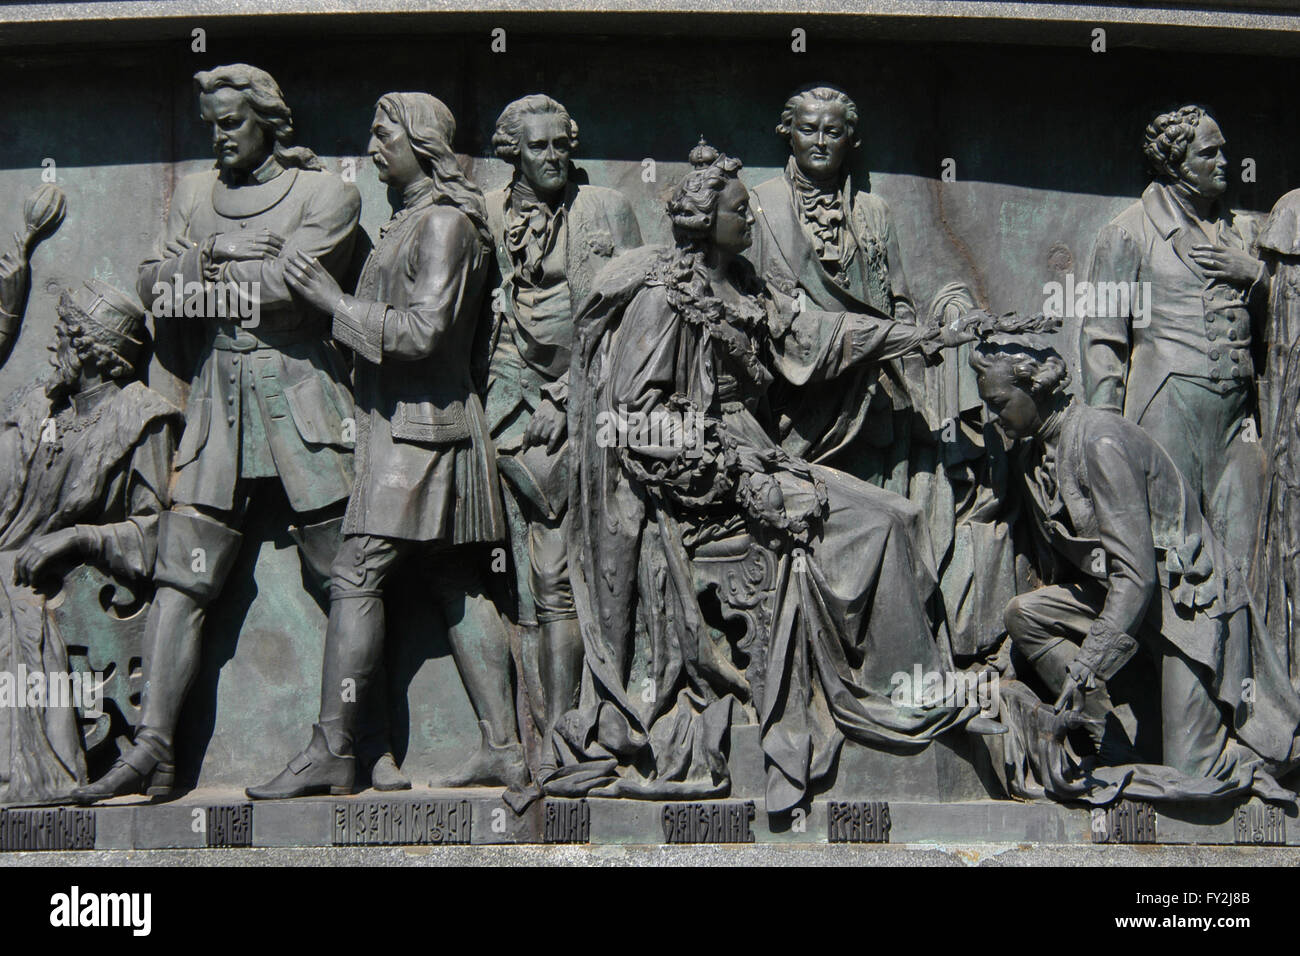 Tsar Peter the Great and Empress Catherine the Great depicted in the bas relief dedicated to Russian statesmen by Russian sculptor Nikolai Laveretsky. Detail of the Monument to the Millennium of Russia (1862) designed by Mikhail Mikeshin in Veliky Novgorod, Russia. Persons from left to right: Tsar Alexis of Russia (sitting), Tsar Peter the Great of Russia, Yakov Dolgorukov, Ivan Betskoy, Empress Catherine the Great (sitting), Alexander Bezborodko, Grigory Potyomkin (kneeling) and Viktor Kochubey. Stock Photo